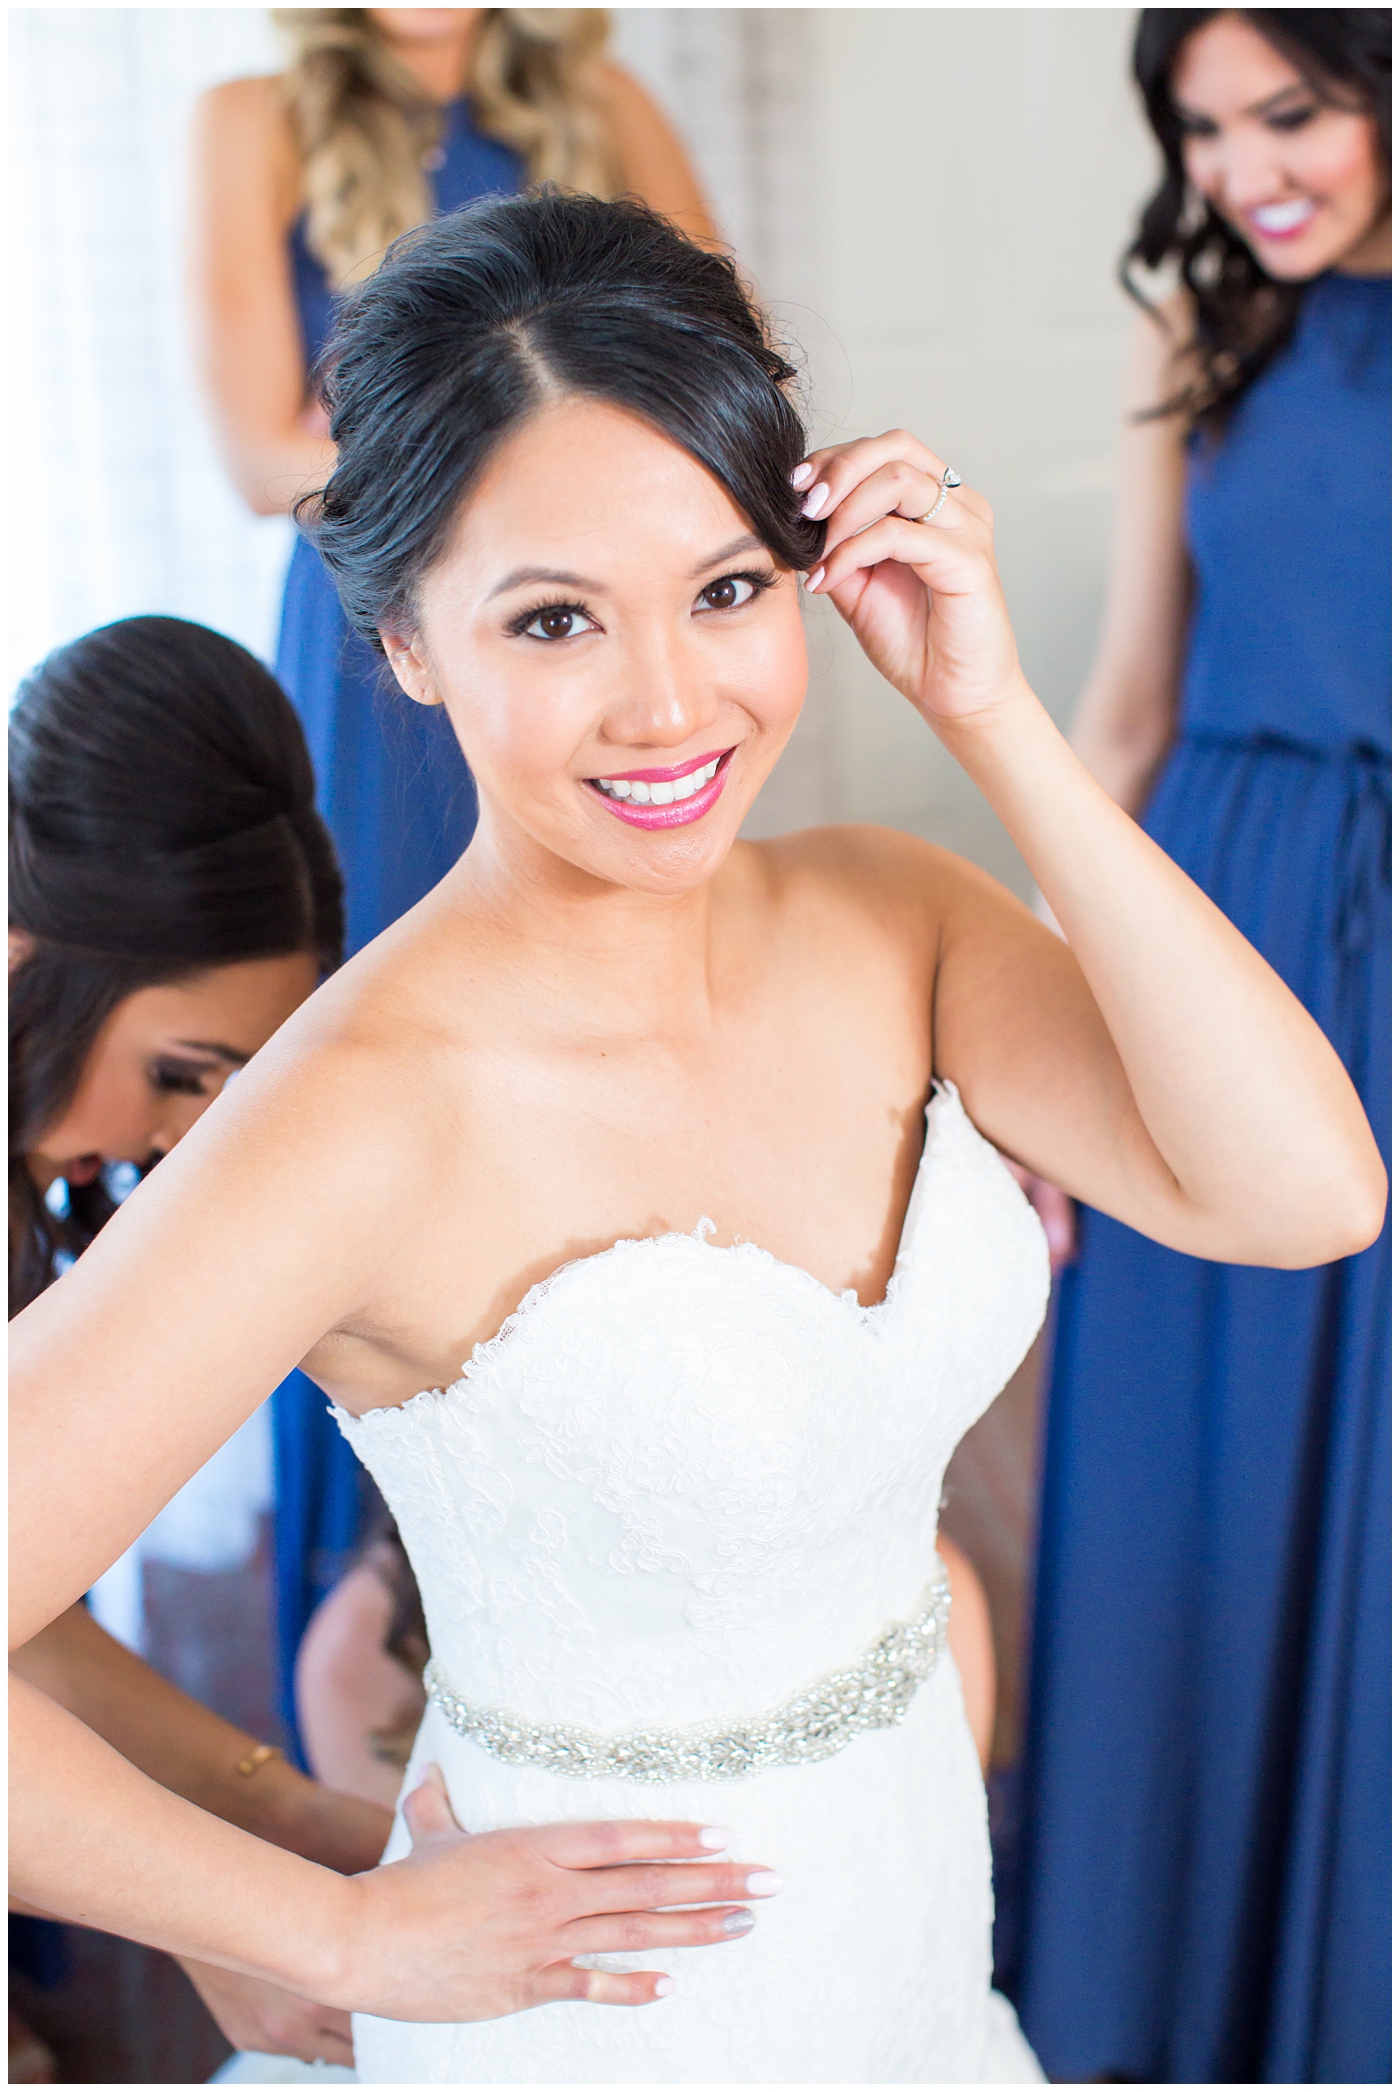 Bride in strapless maggie sorrento dress getting ready with bridesmaids in blue long maxi dresses